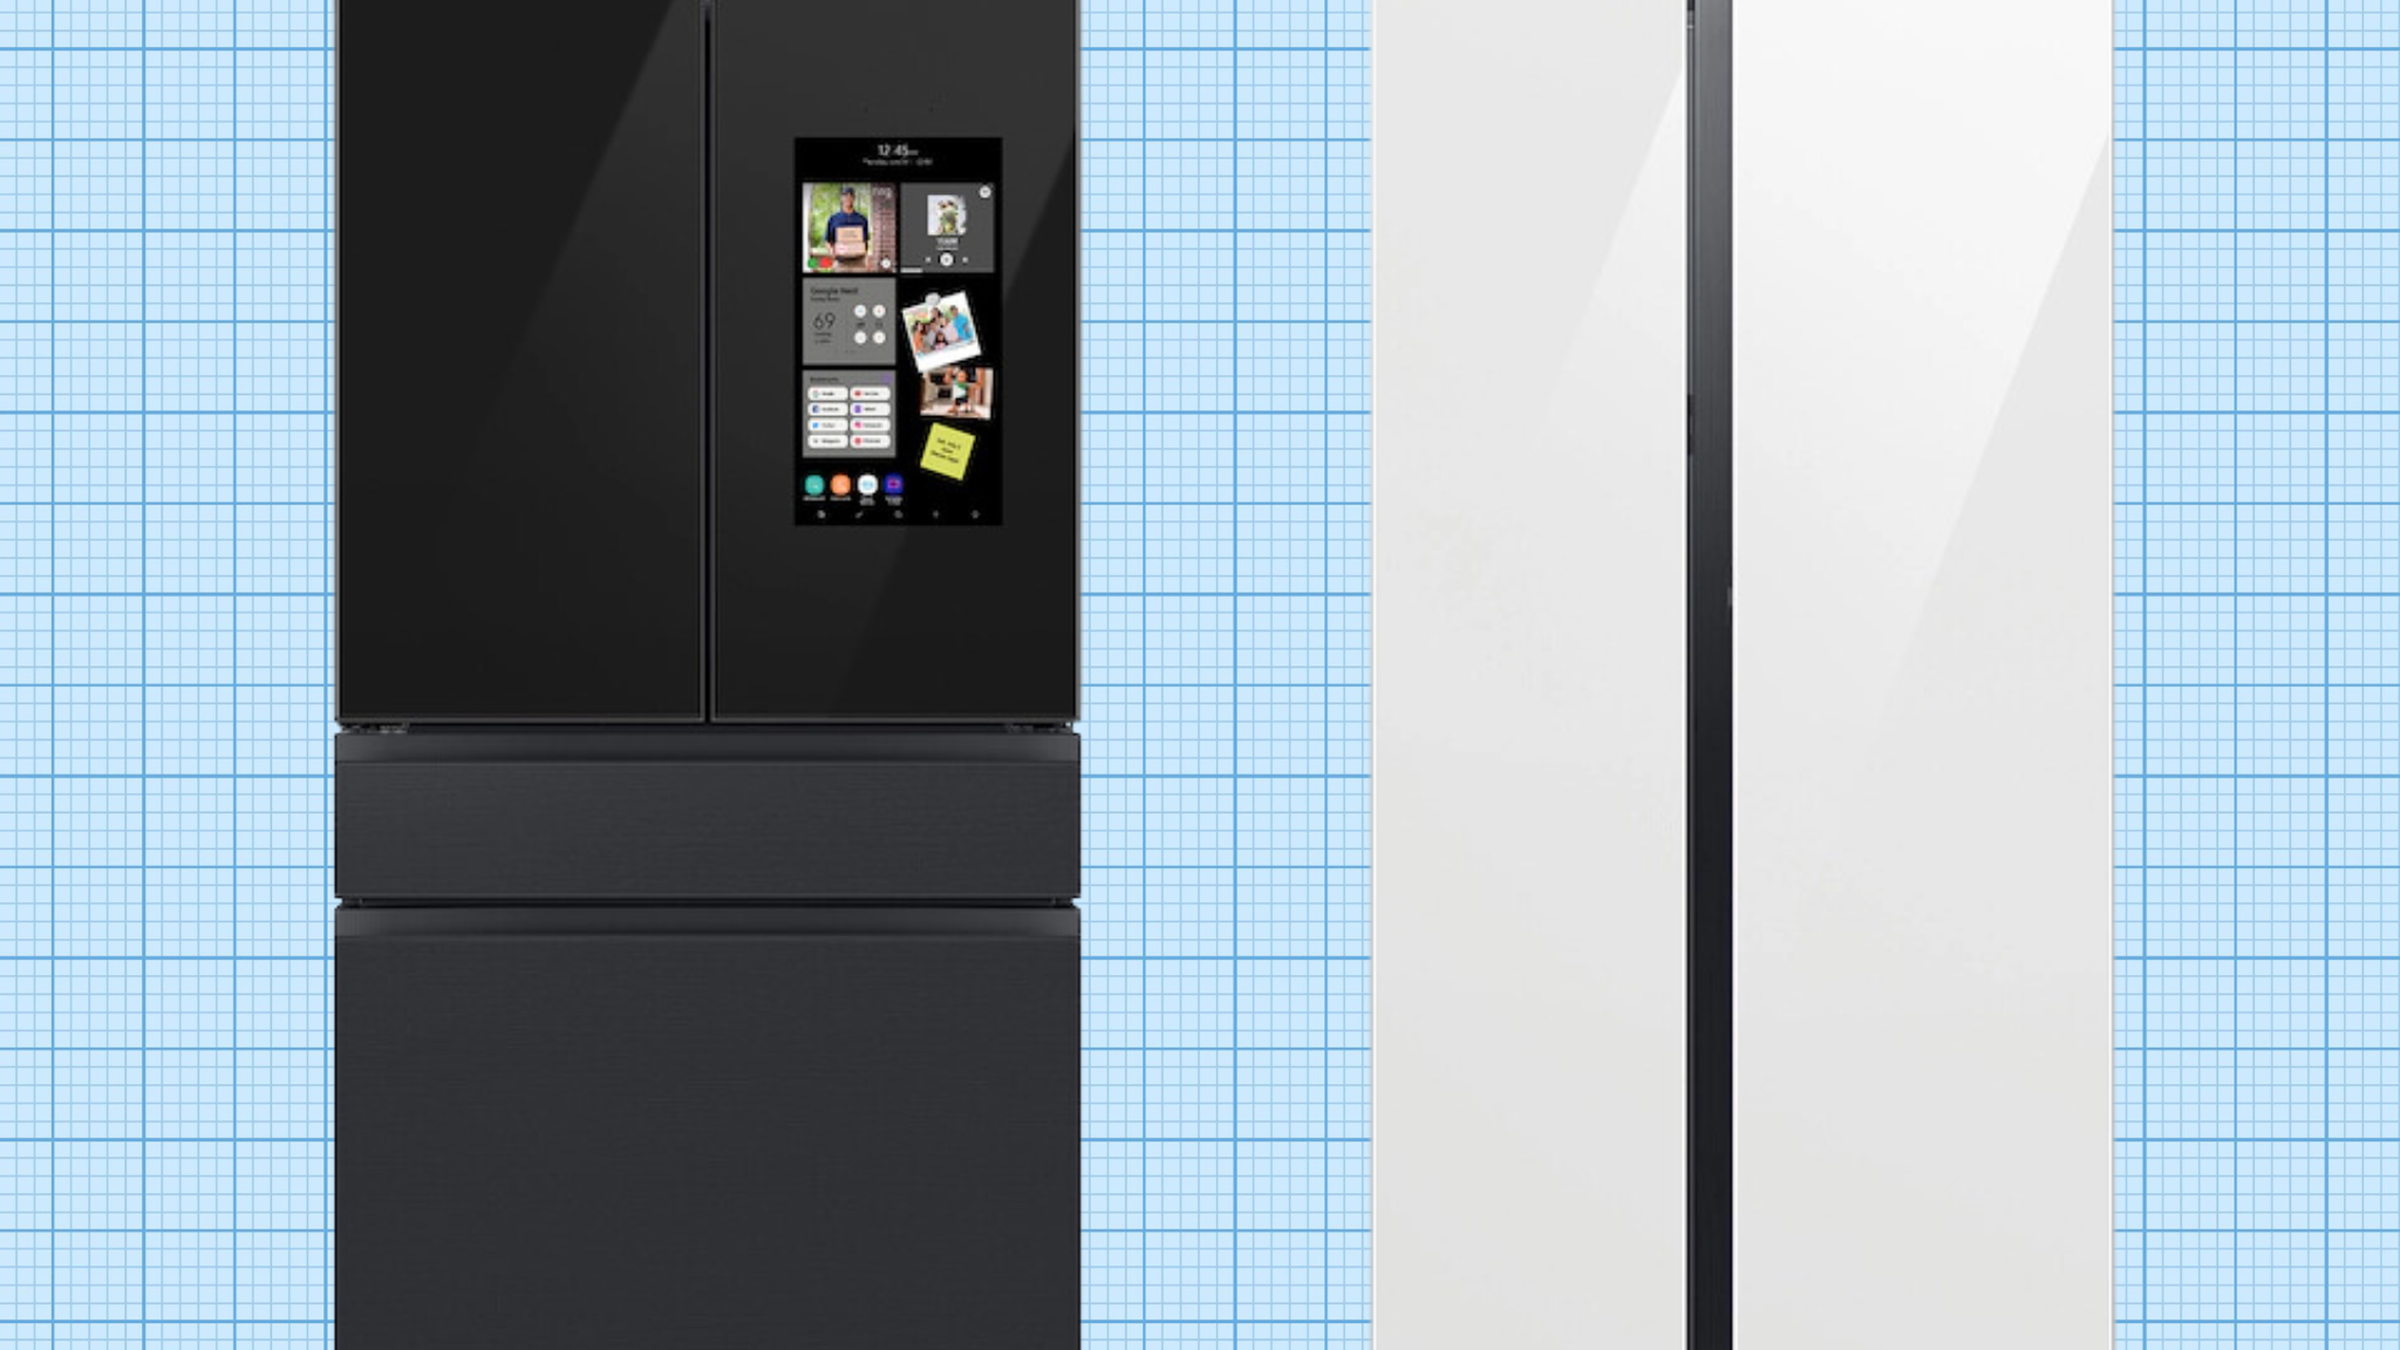 Samsung Bespoke Side-by-Side Refrigerator and Samsung Bespoke 4-Door French Door Refrigerator isolated on blue grid paper background